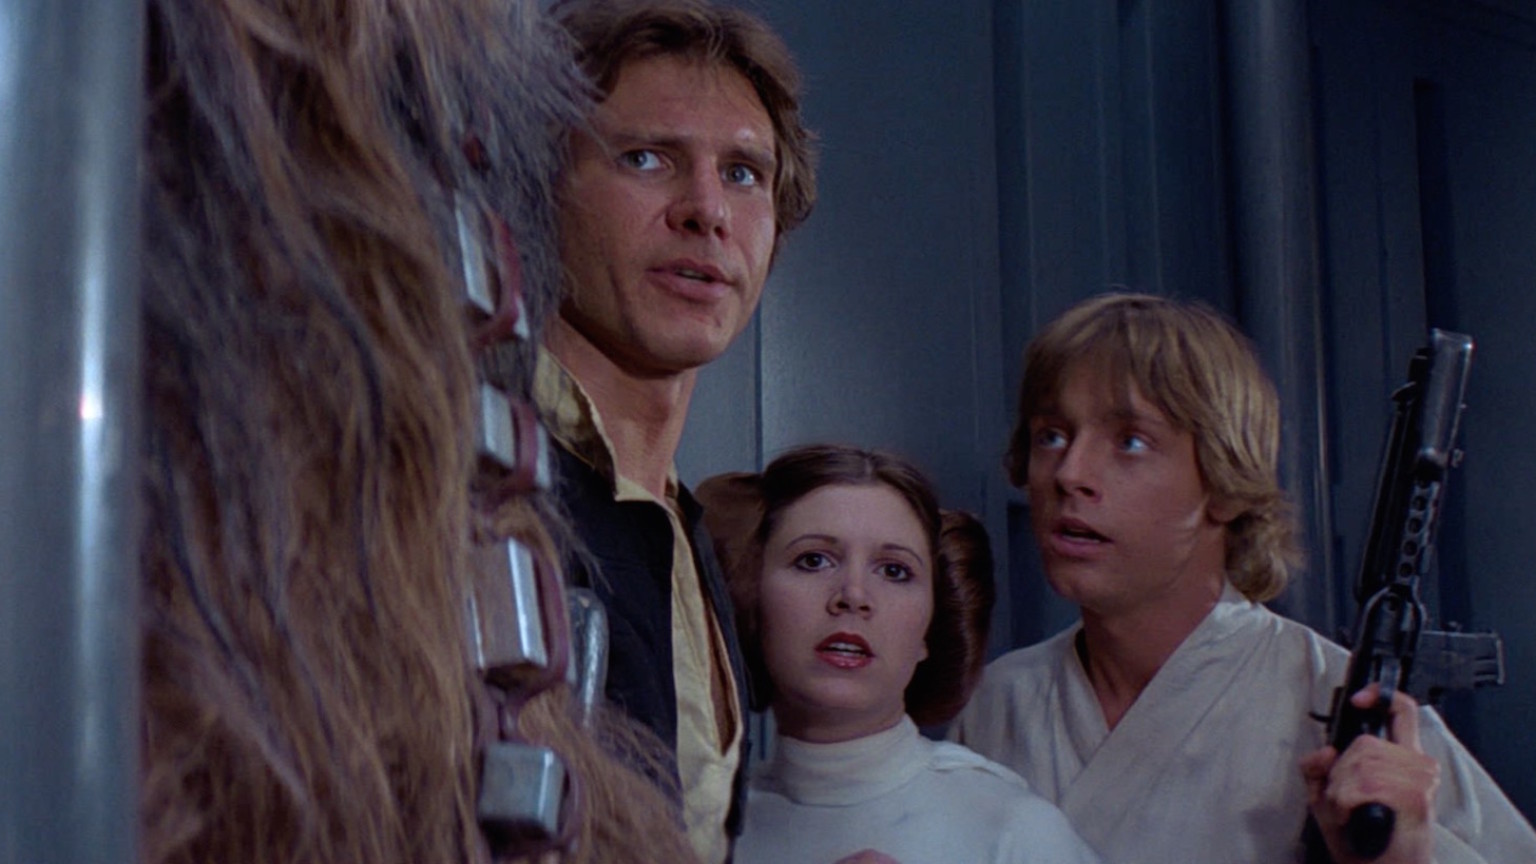 Han Solo, Princess Leia, and Luke Skywalker on the Death Star in the original Star Wars movie